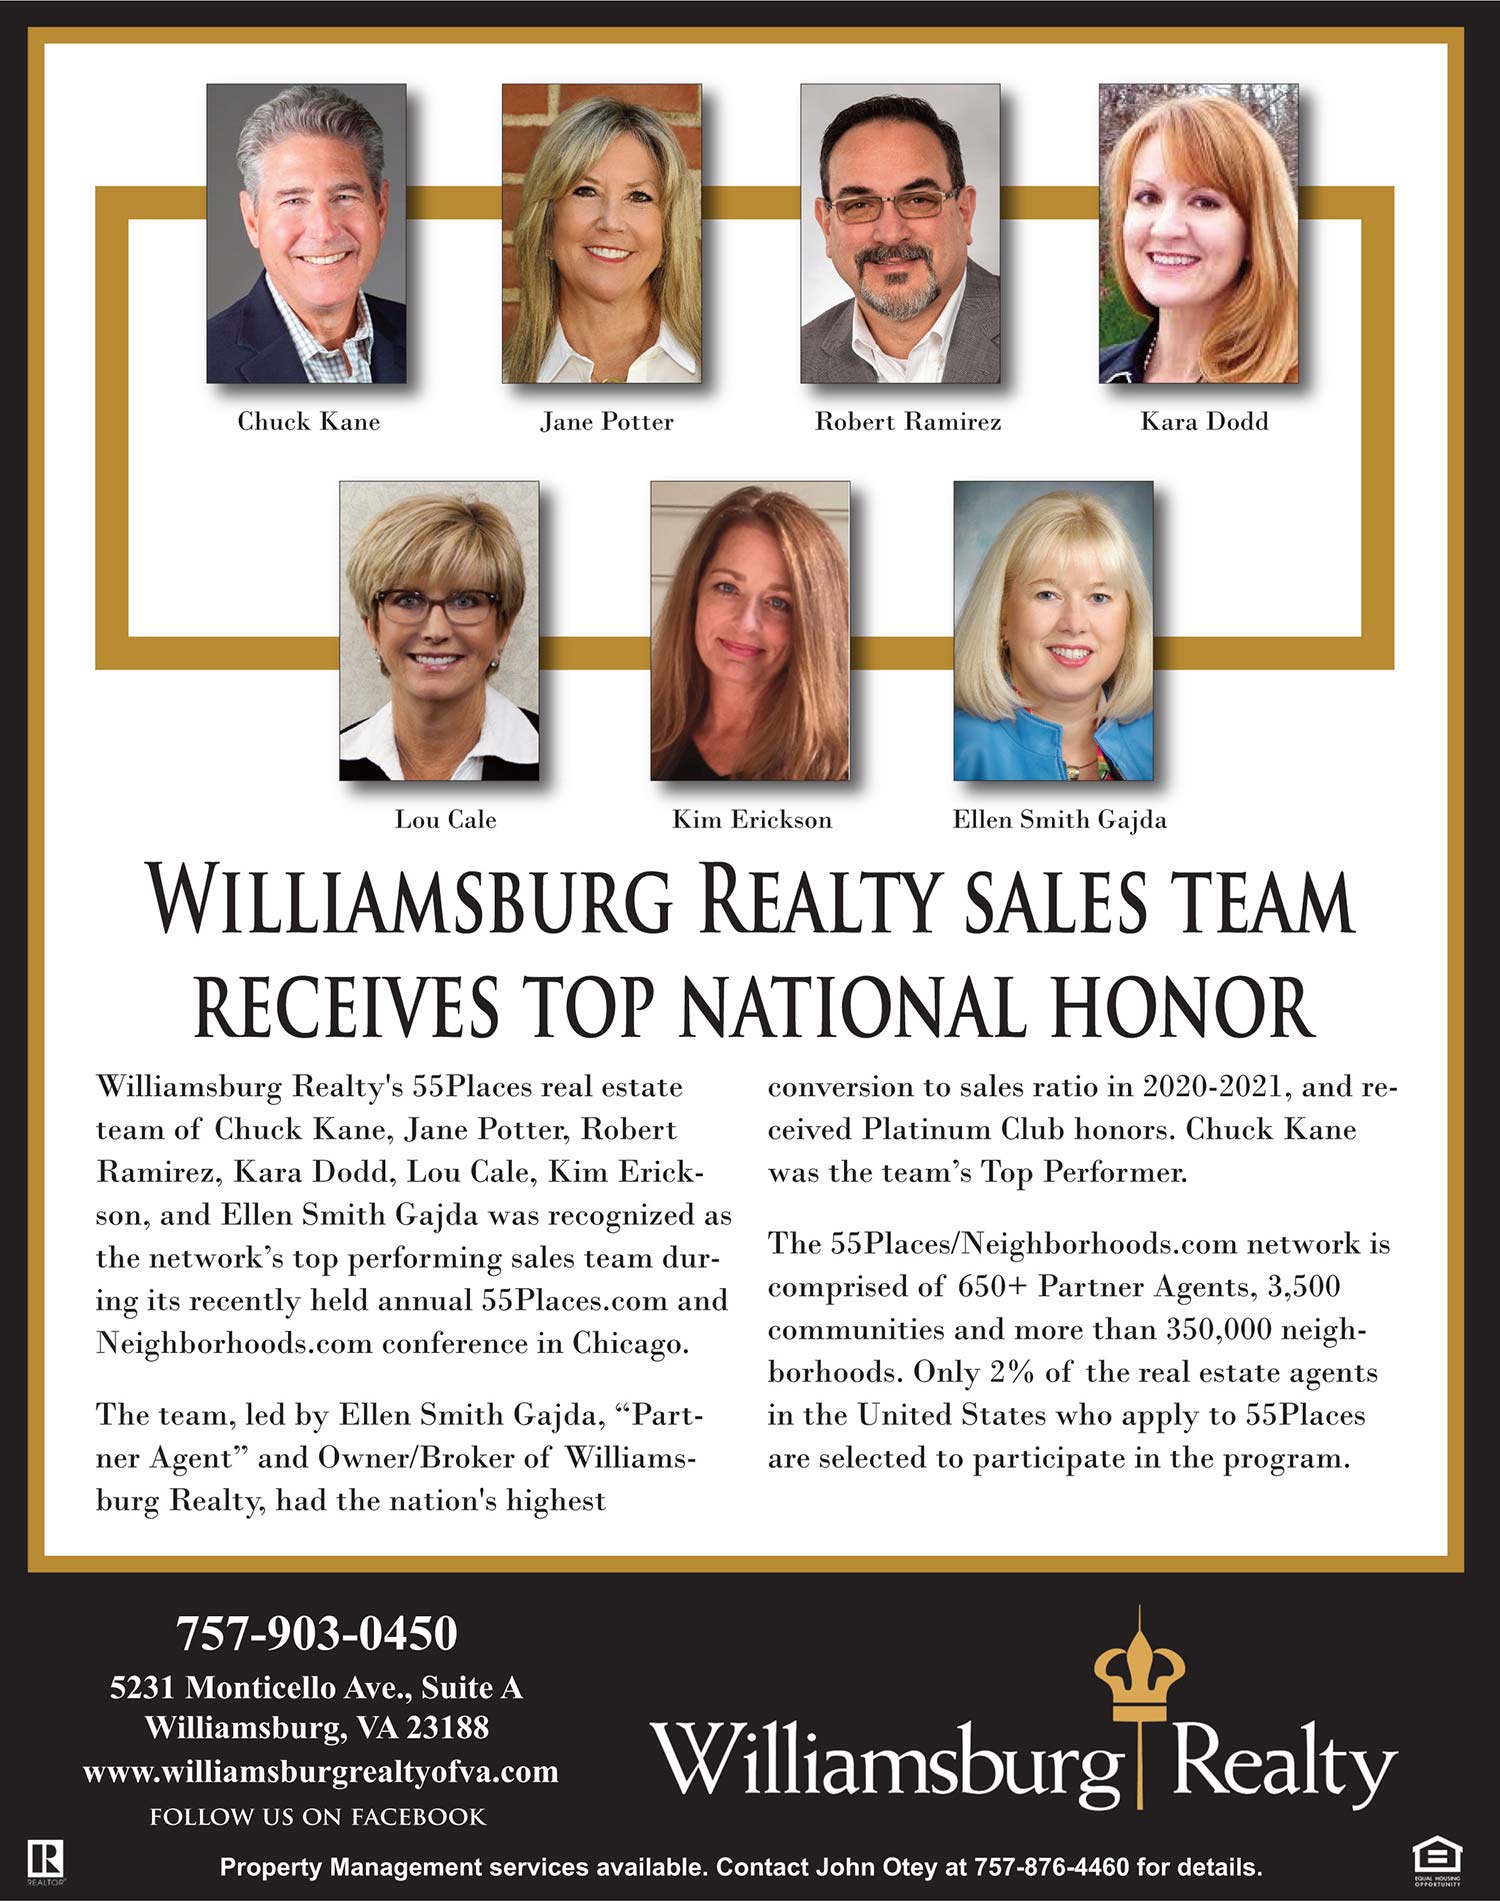 Williamsburg Realty Sales Team Received Top National Honor